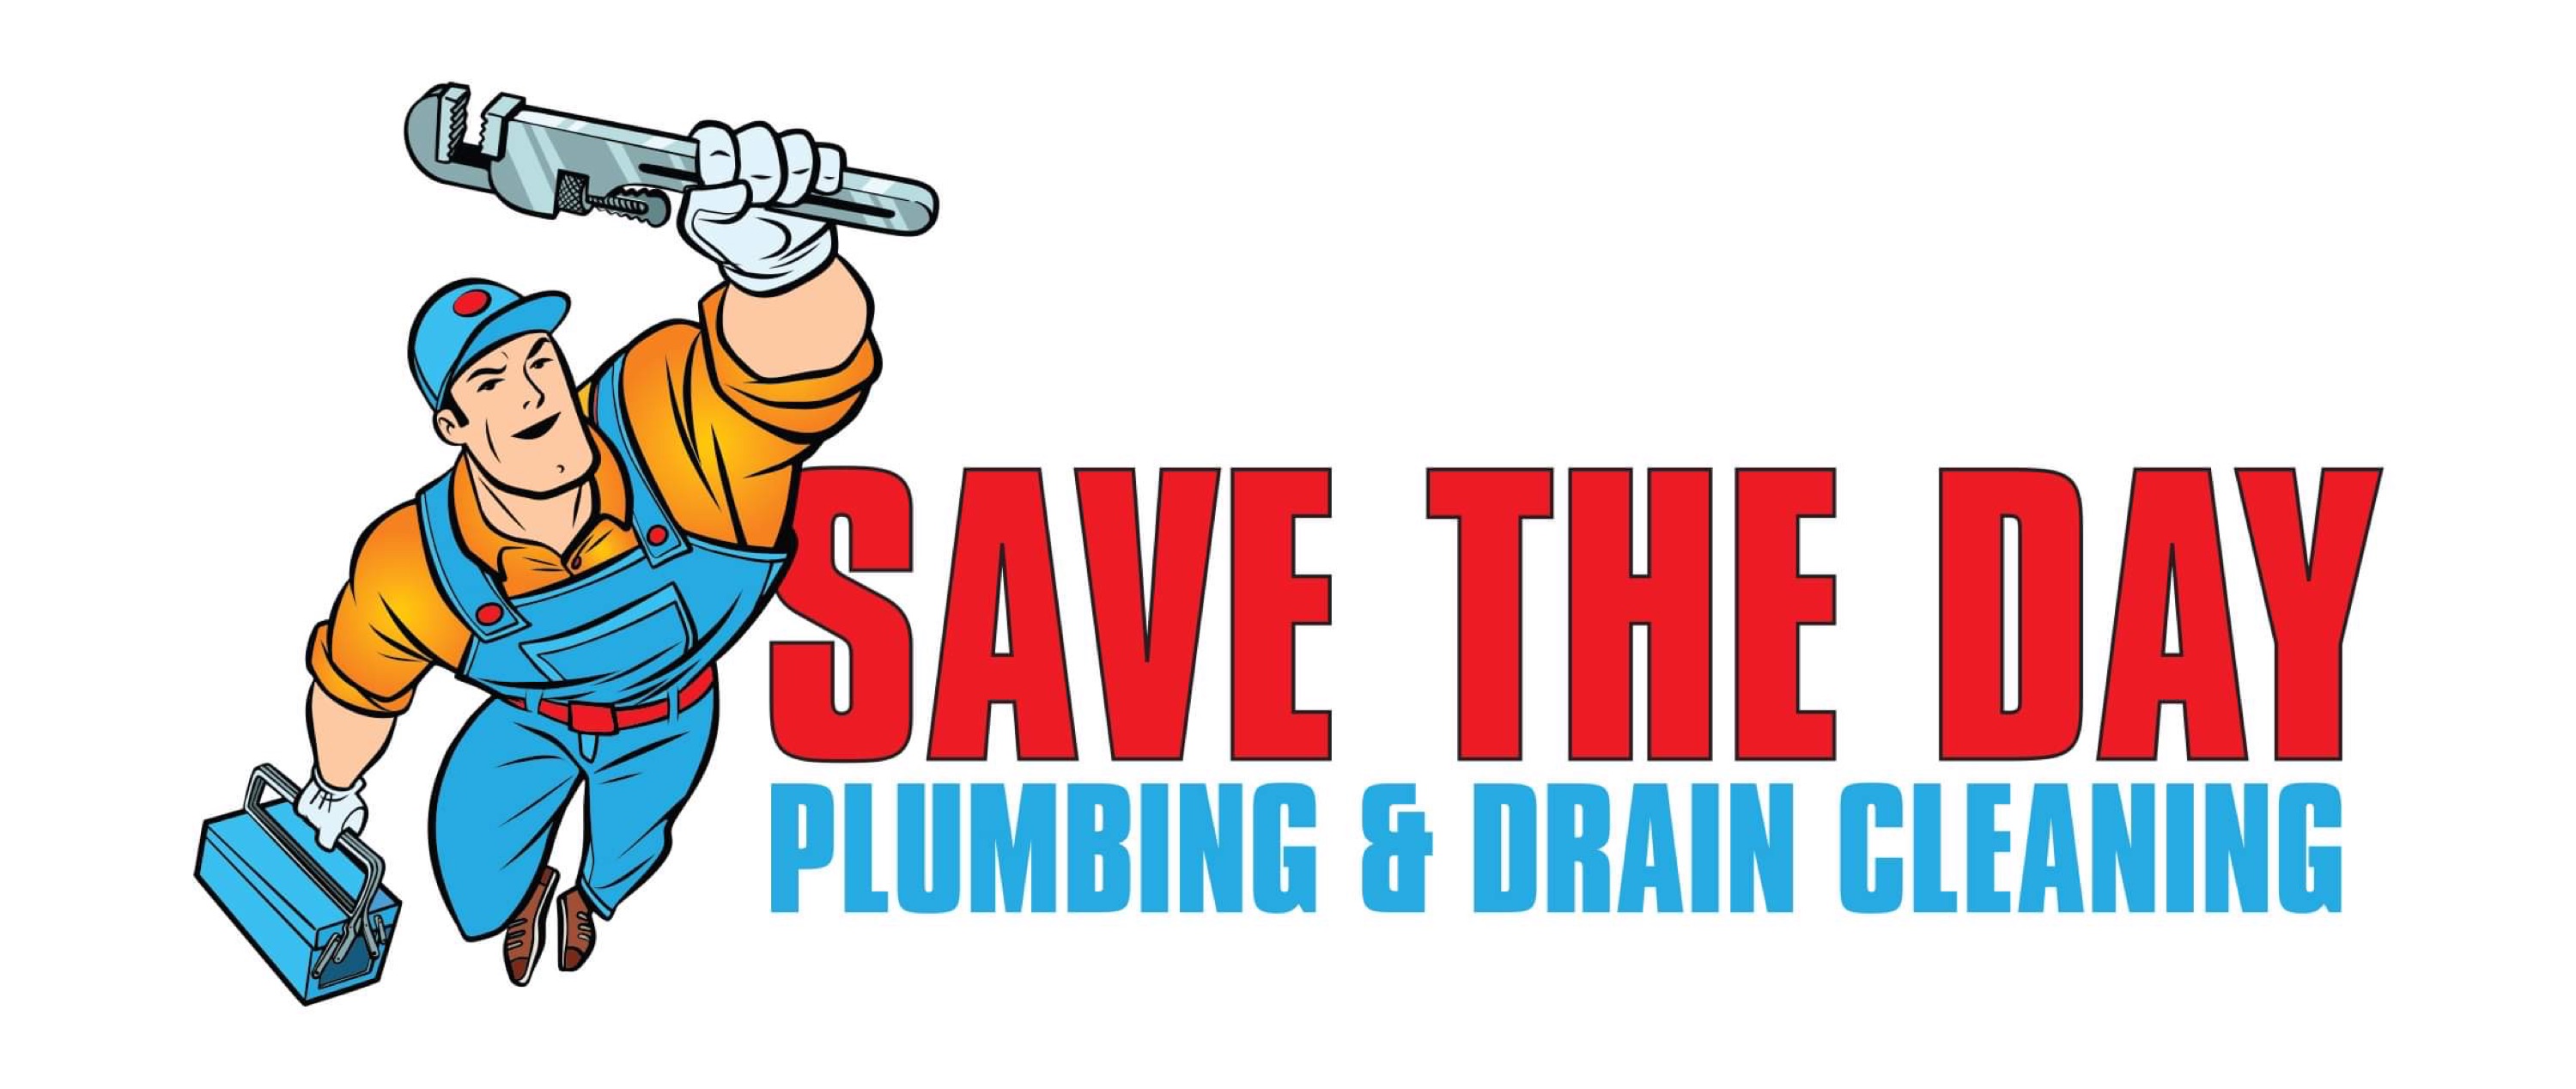 Save the Day Plumbing & Drain Cleaning Logo